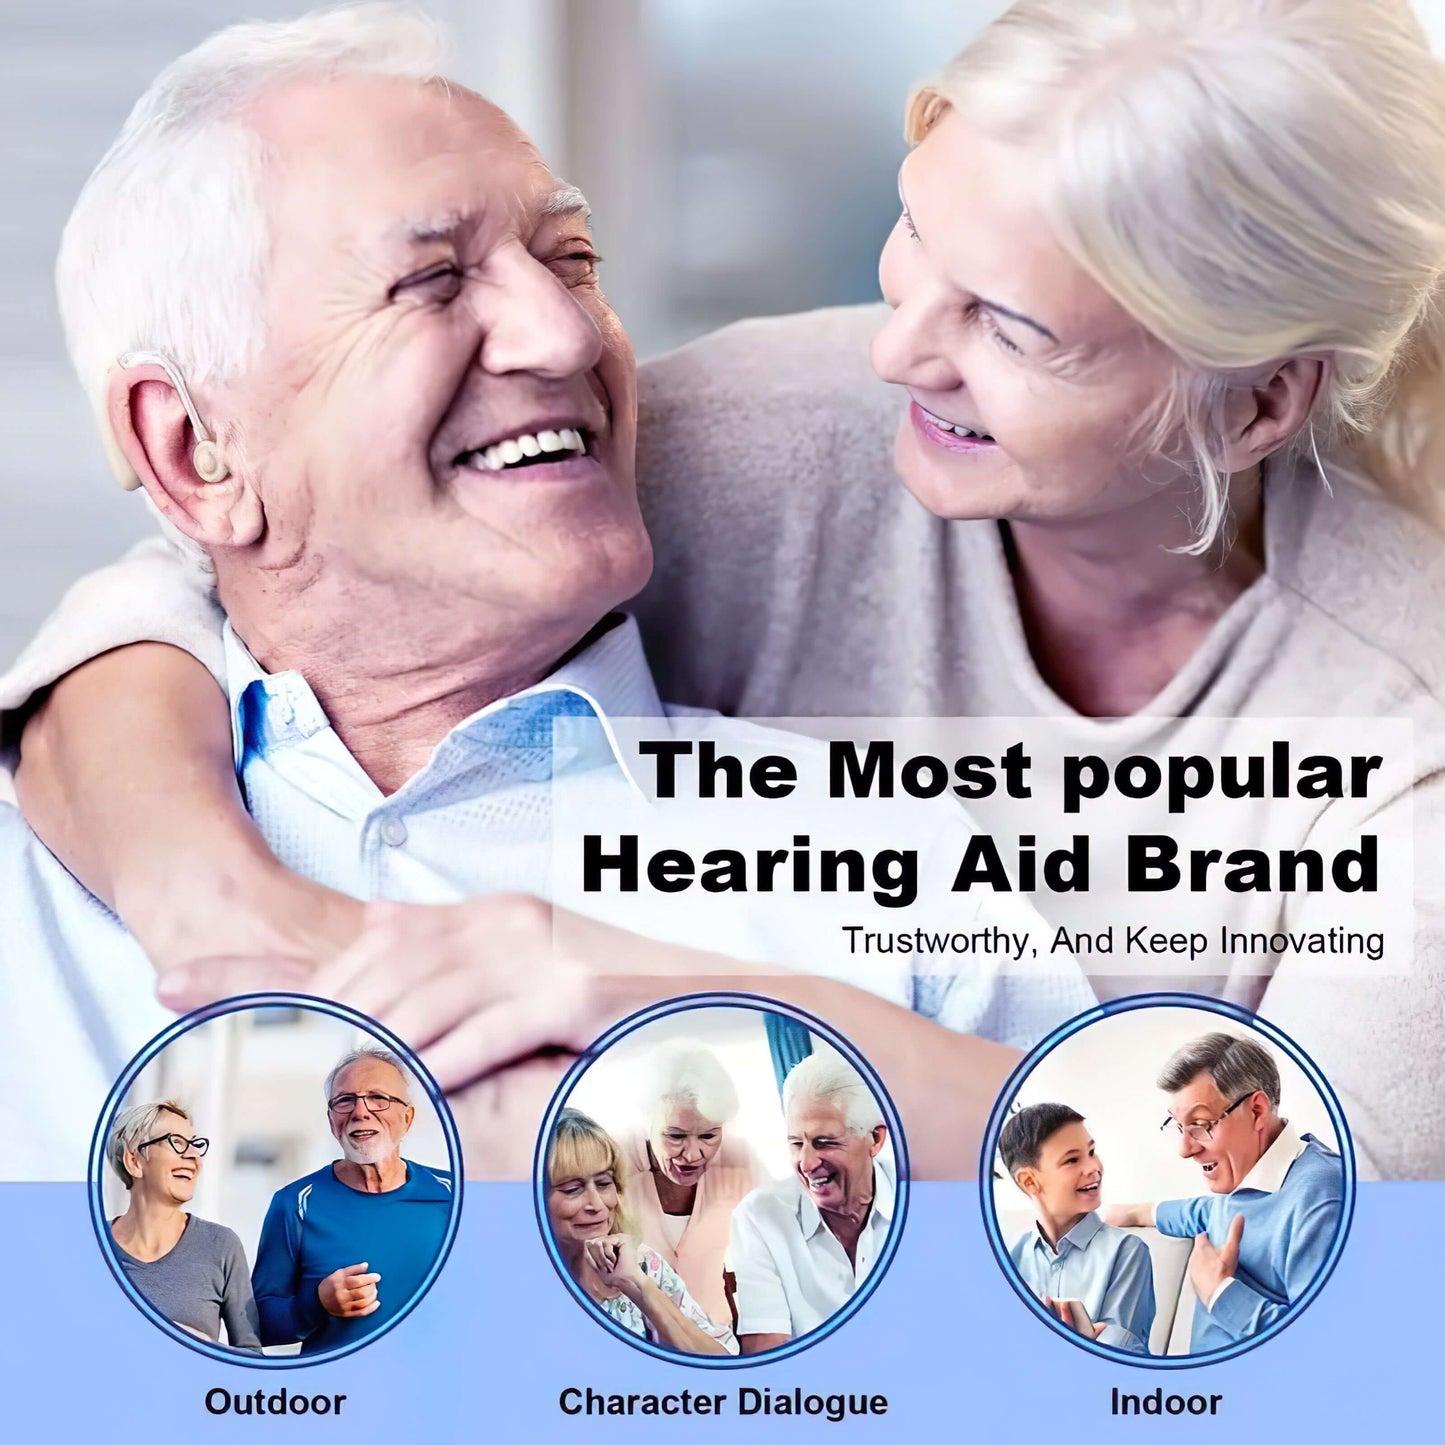 WetaSound™ Rechargeable Universal Hearing Aids